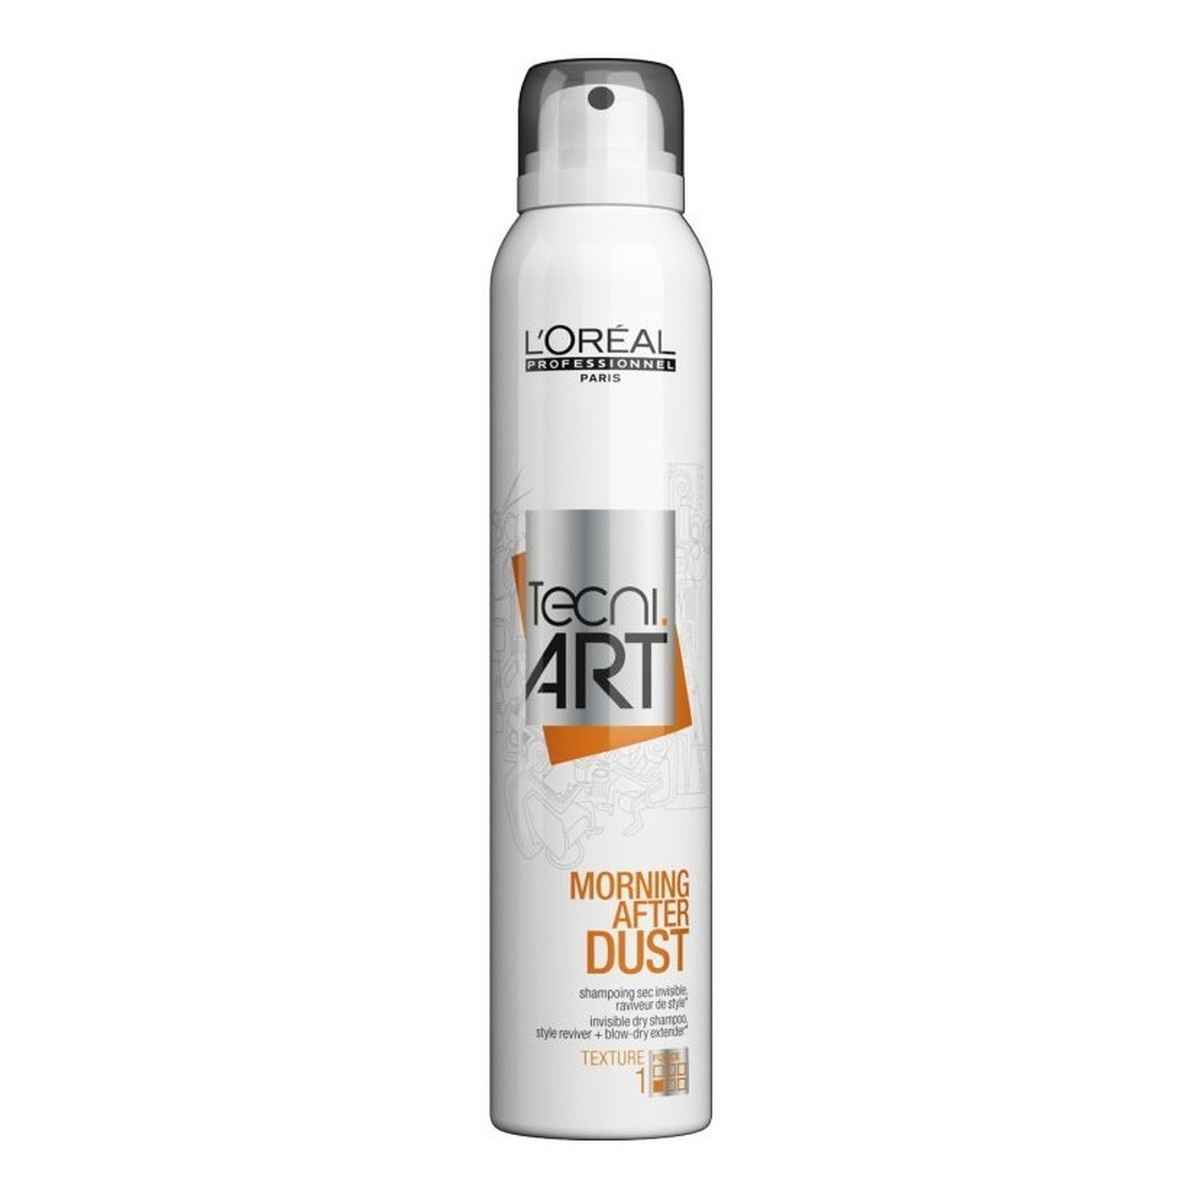 L`oreal Tecni Art Morning After Dust Suchy szampon Texture 1 200ml